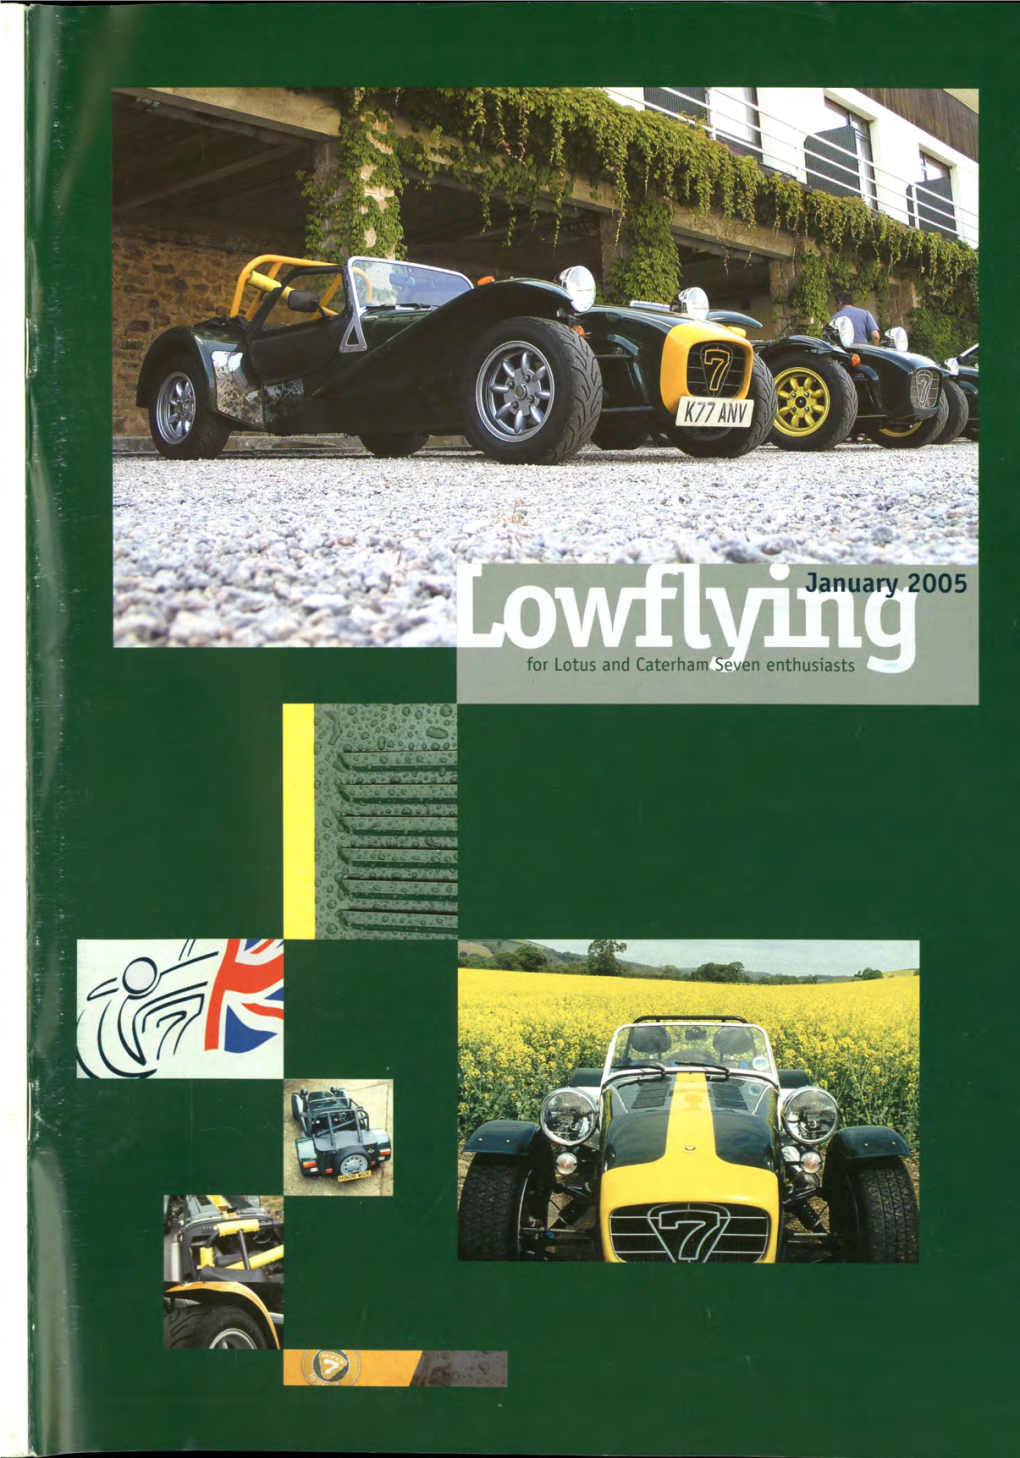 Lowflying Is Published by The